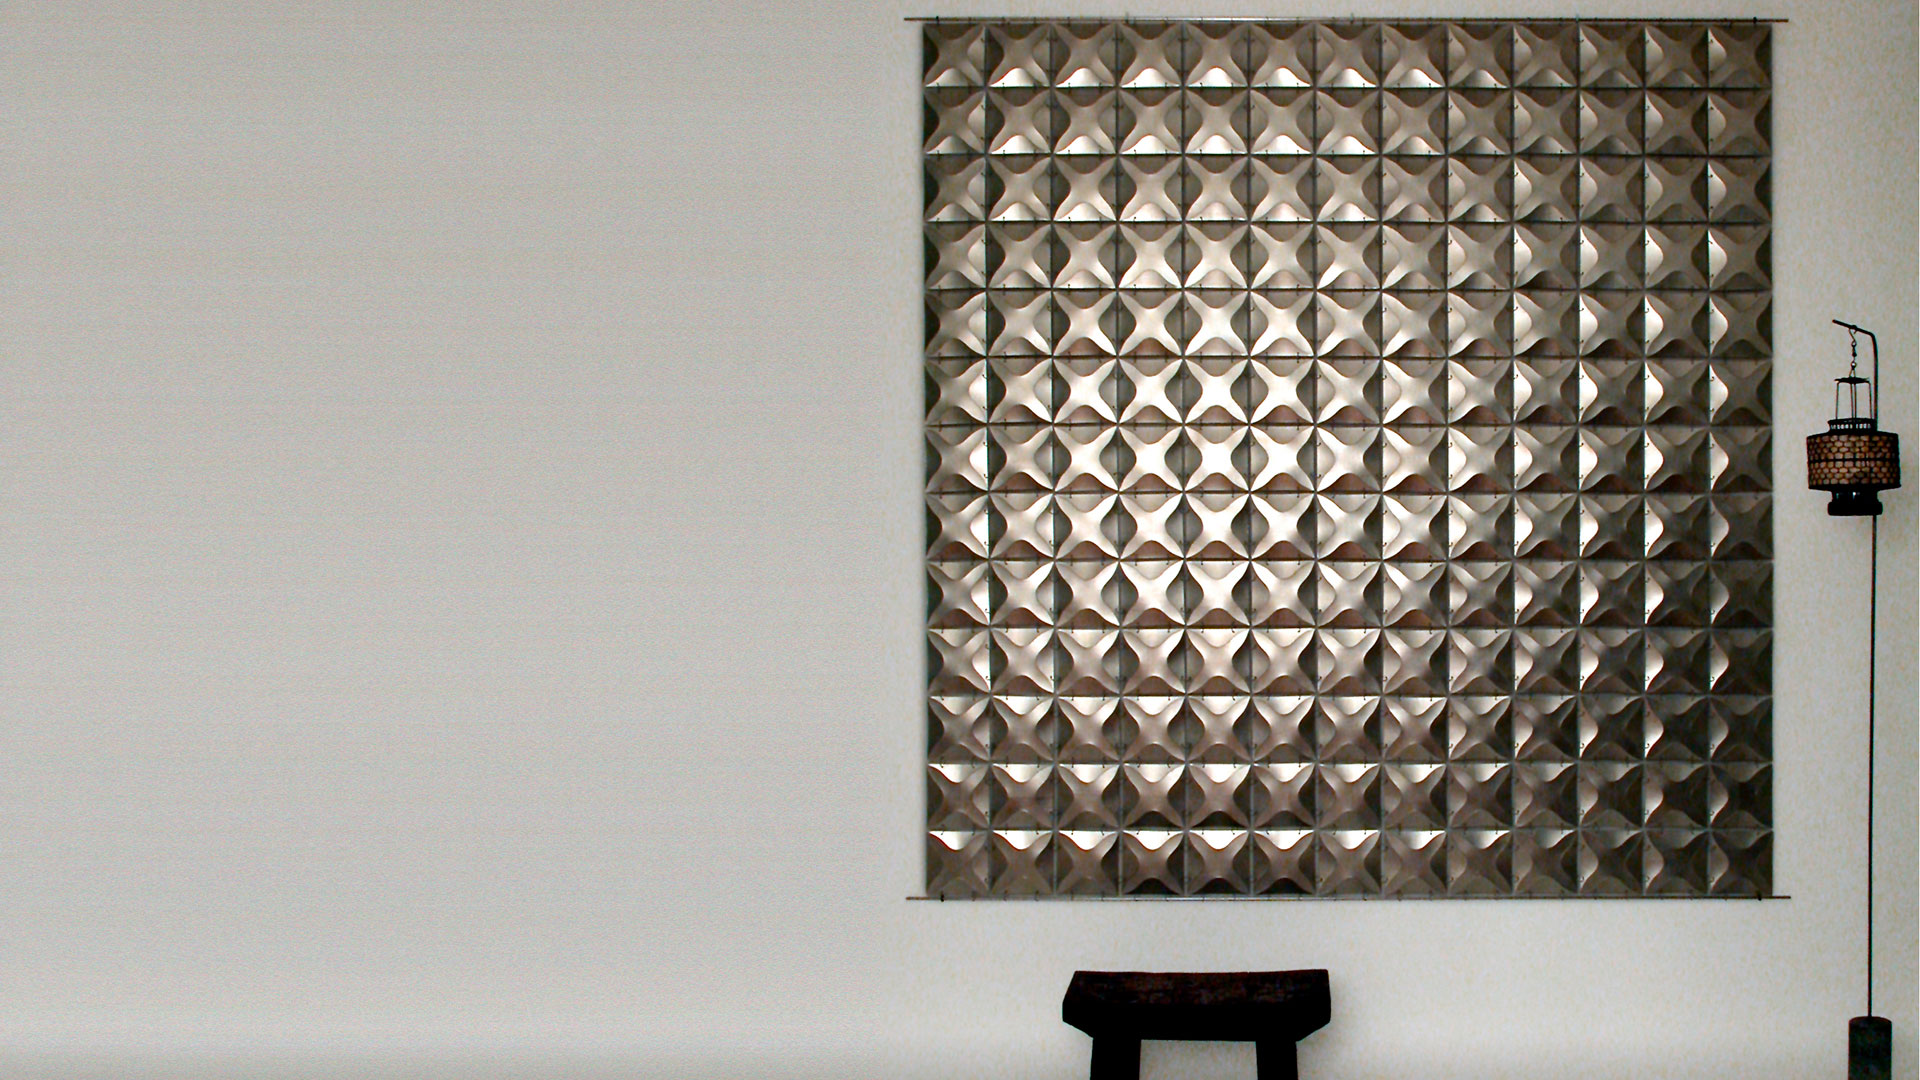 Shiny metal wall hanging constructed of many smaller 3-dimensional x-patten squares next to bench and lamp